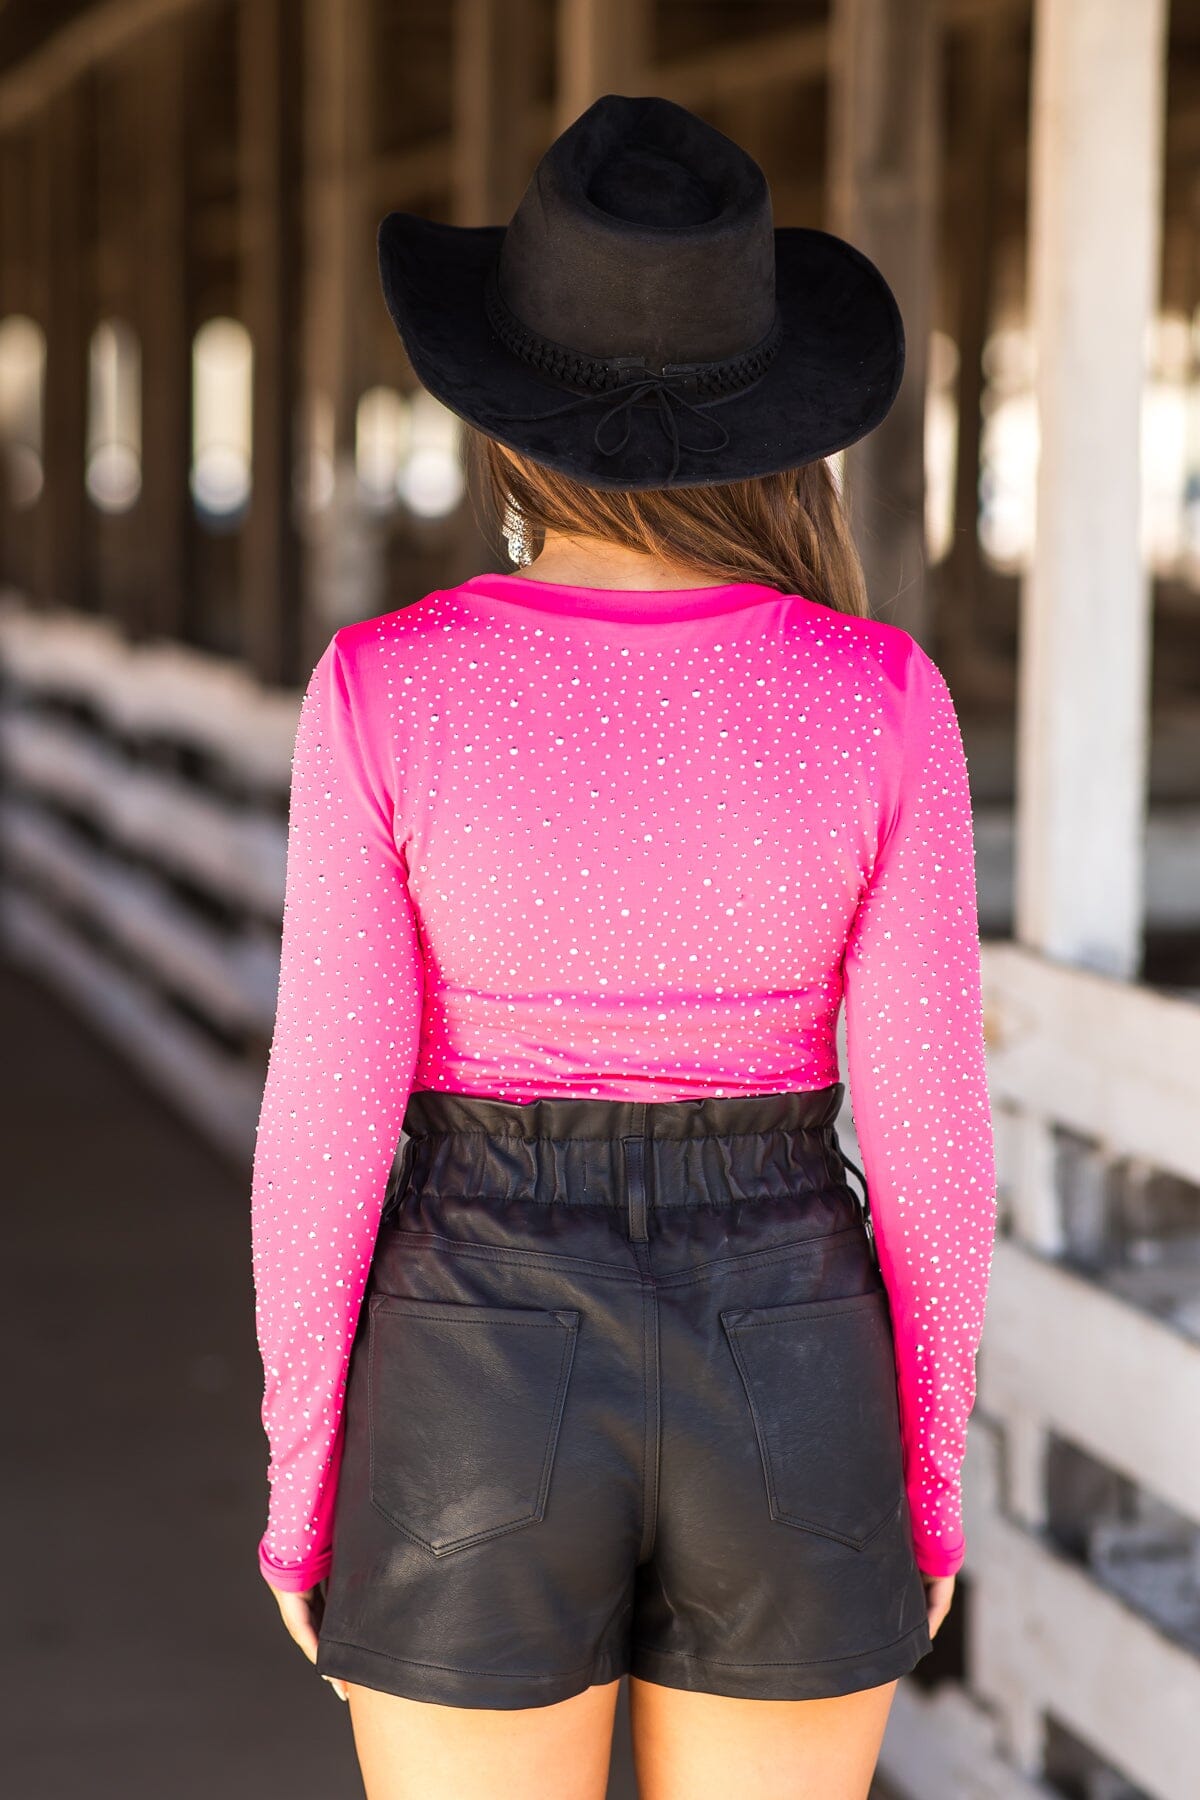 Hot Pink Long Sleeve Bodysuit With Rhinestones - Filly Flair